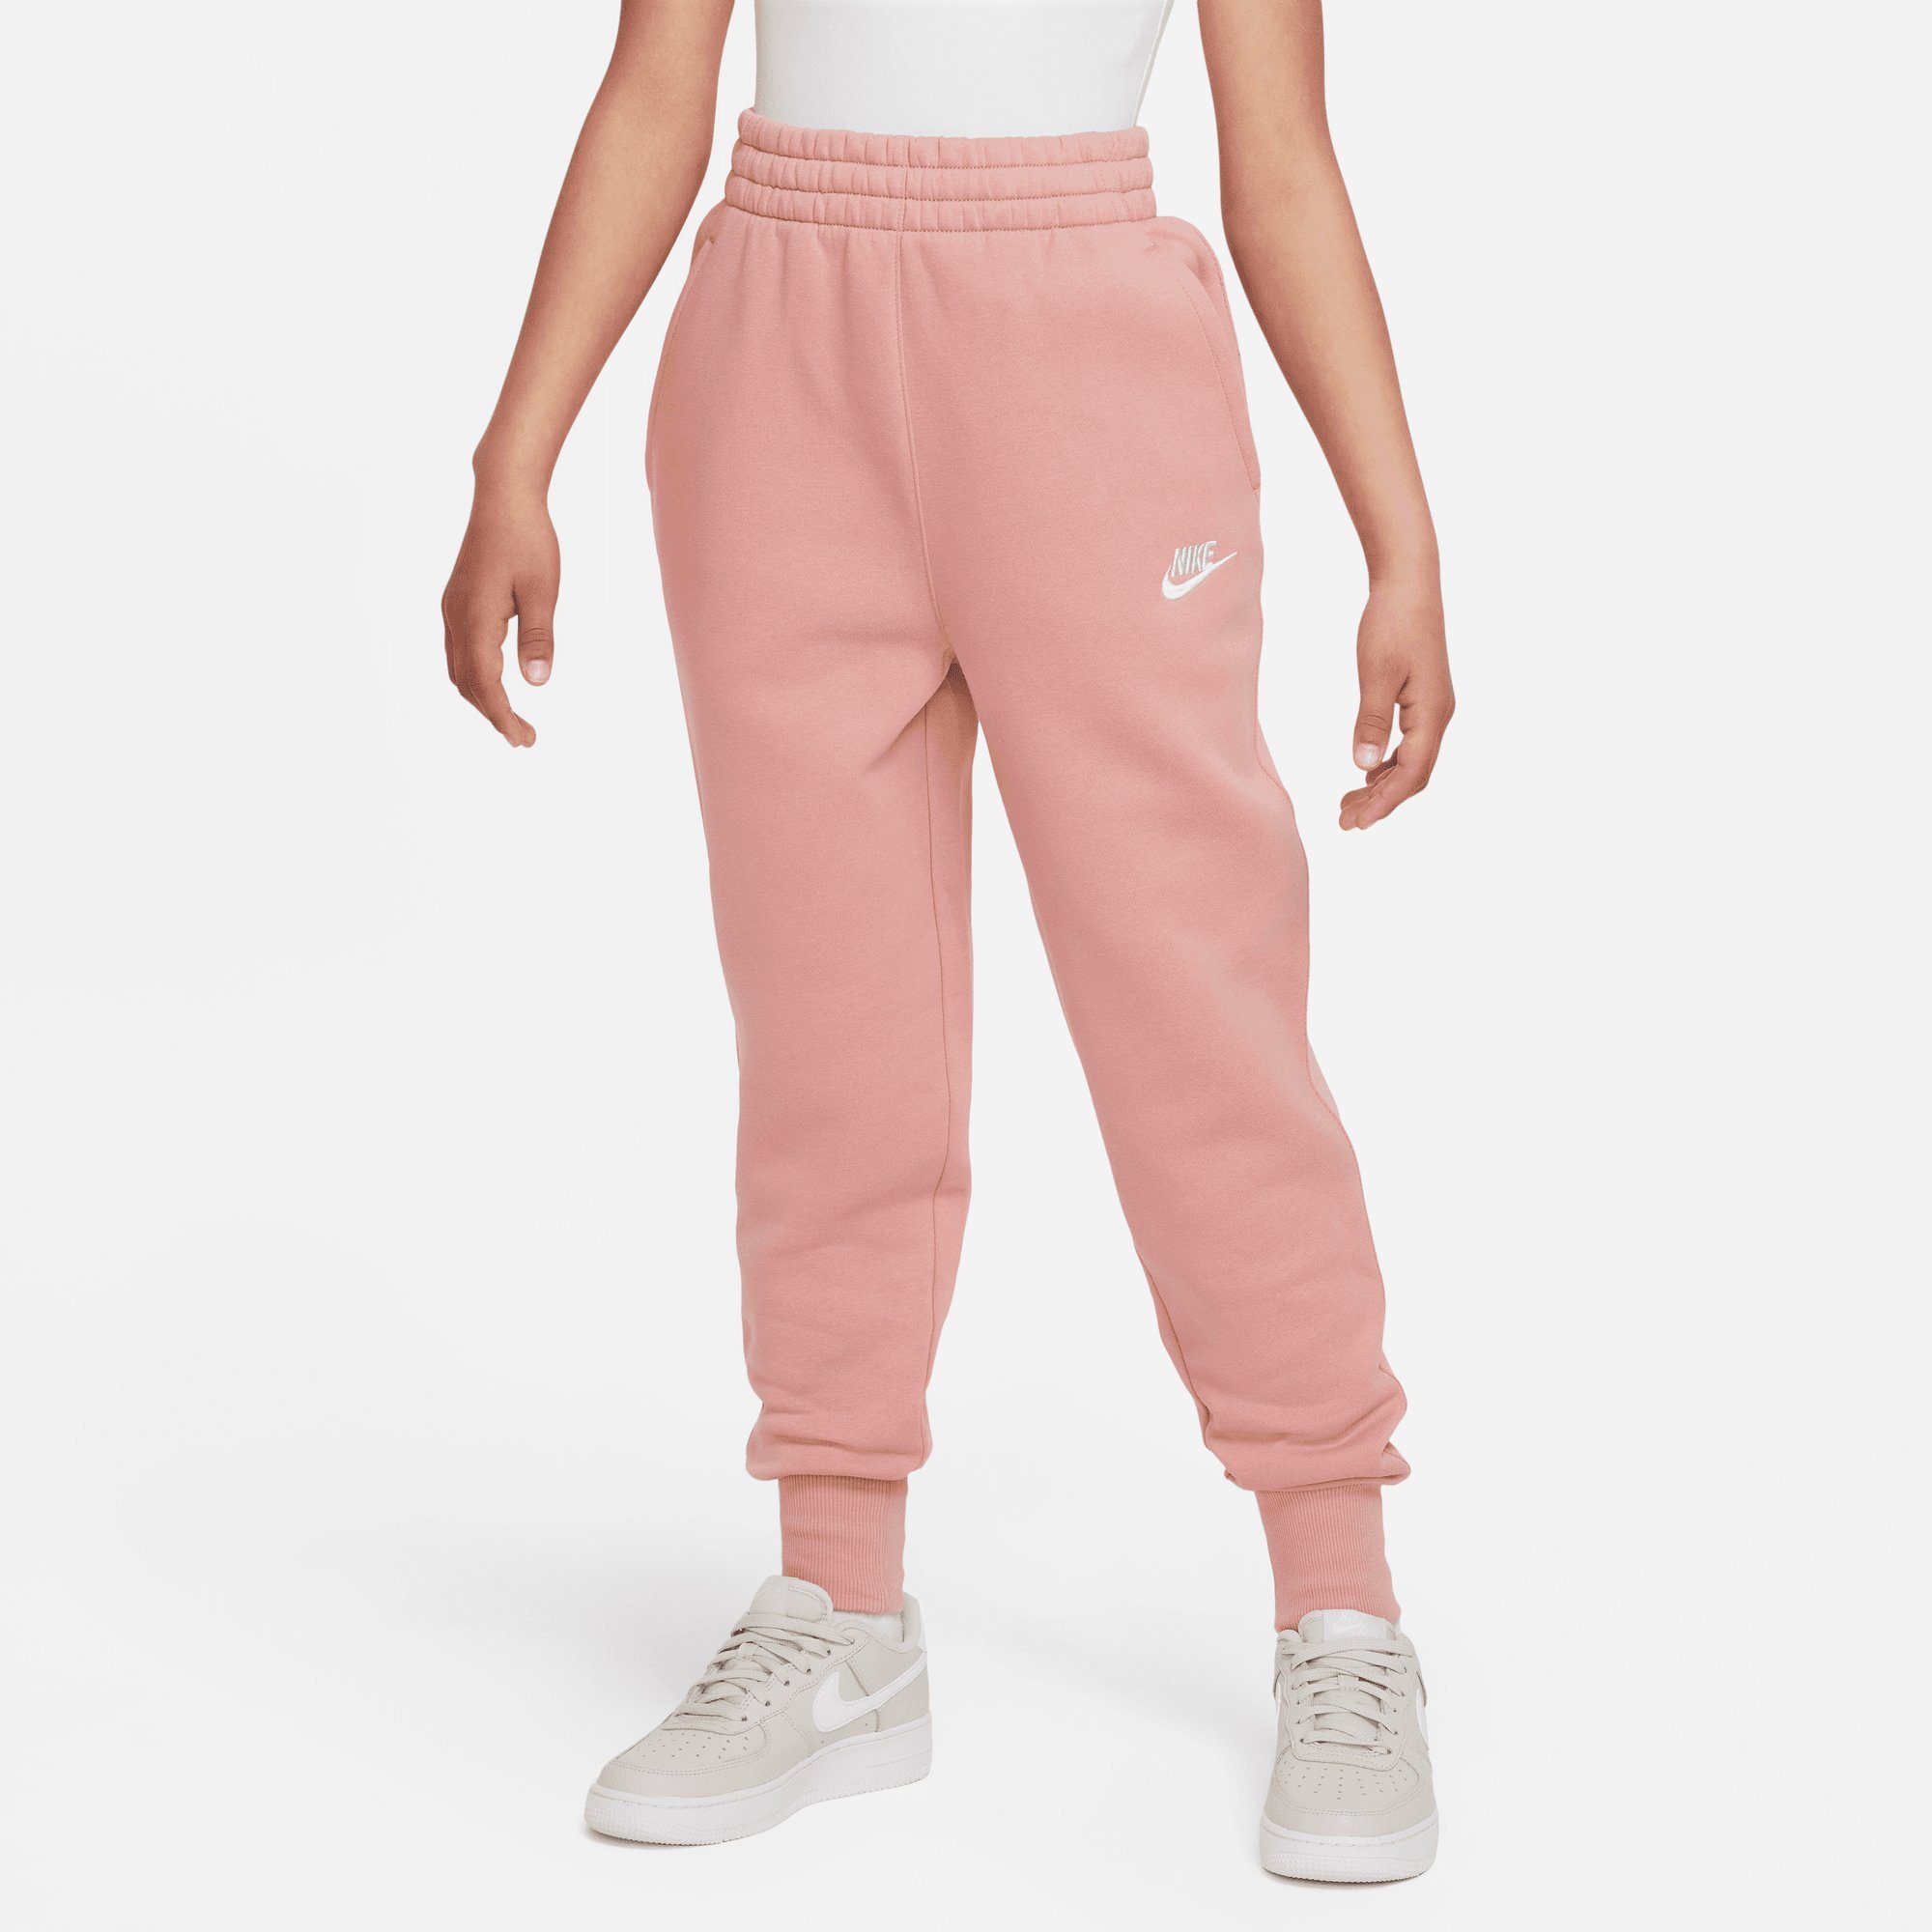 Nike KIDS' PANTS HIGH-WAISTED RED (GIRLS) Sportswear CLUB BIG FLEECE STARDUST/RED Jogginghose STARDUST/WHITE FITTED